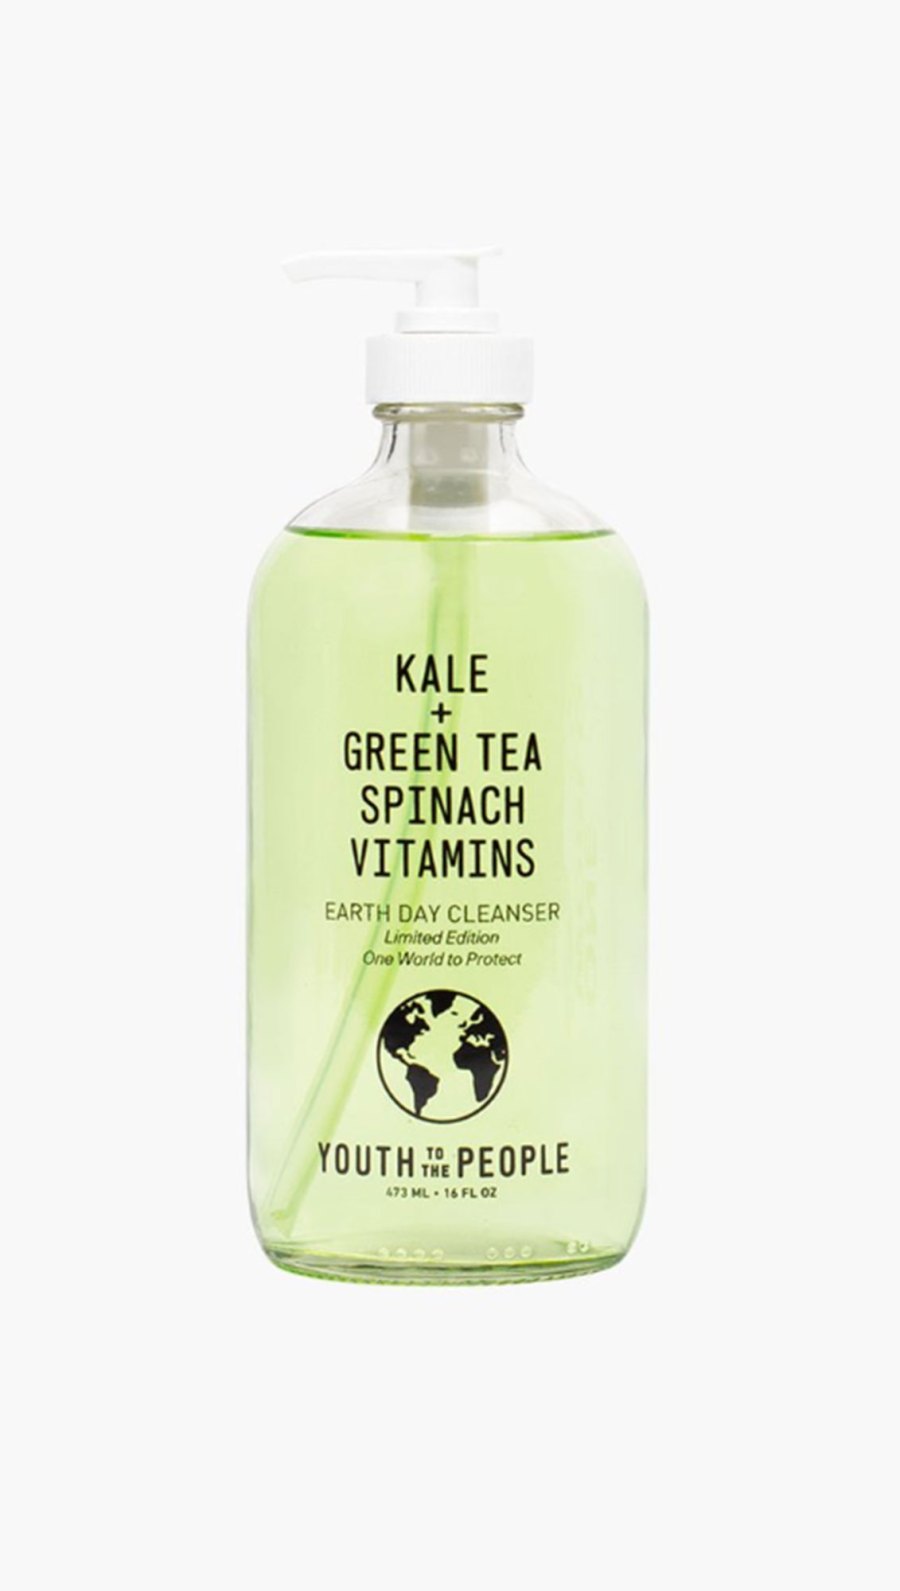 Youth to the People Earth Day Cleanser best clean beauty products earth day 2019